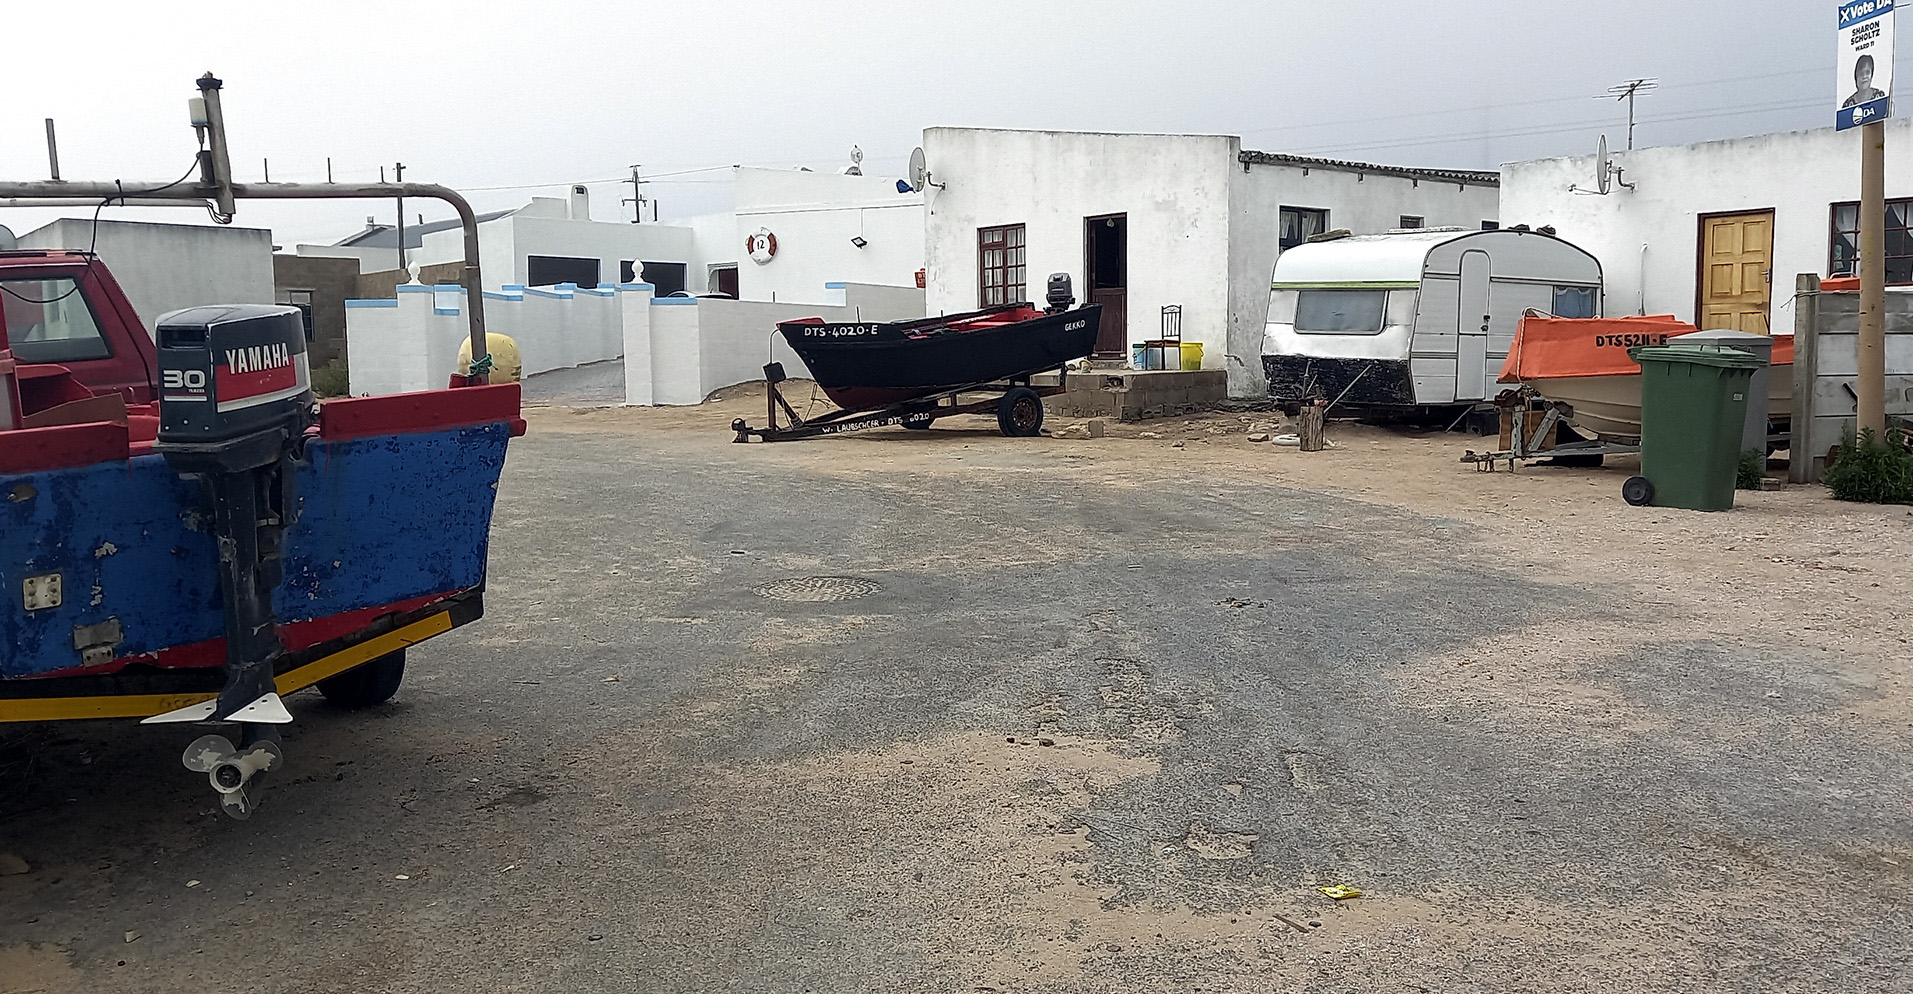 fishers paternoster